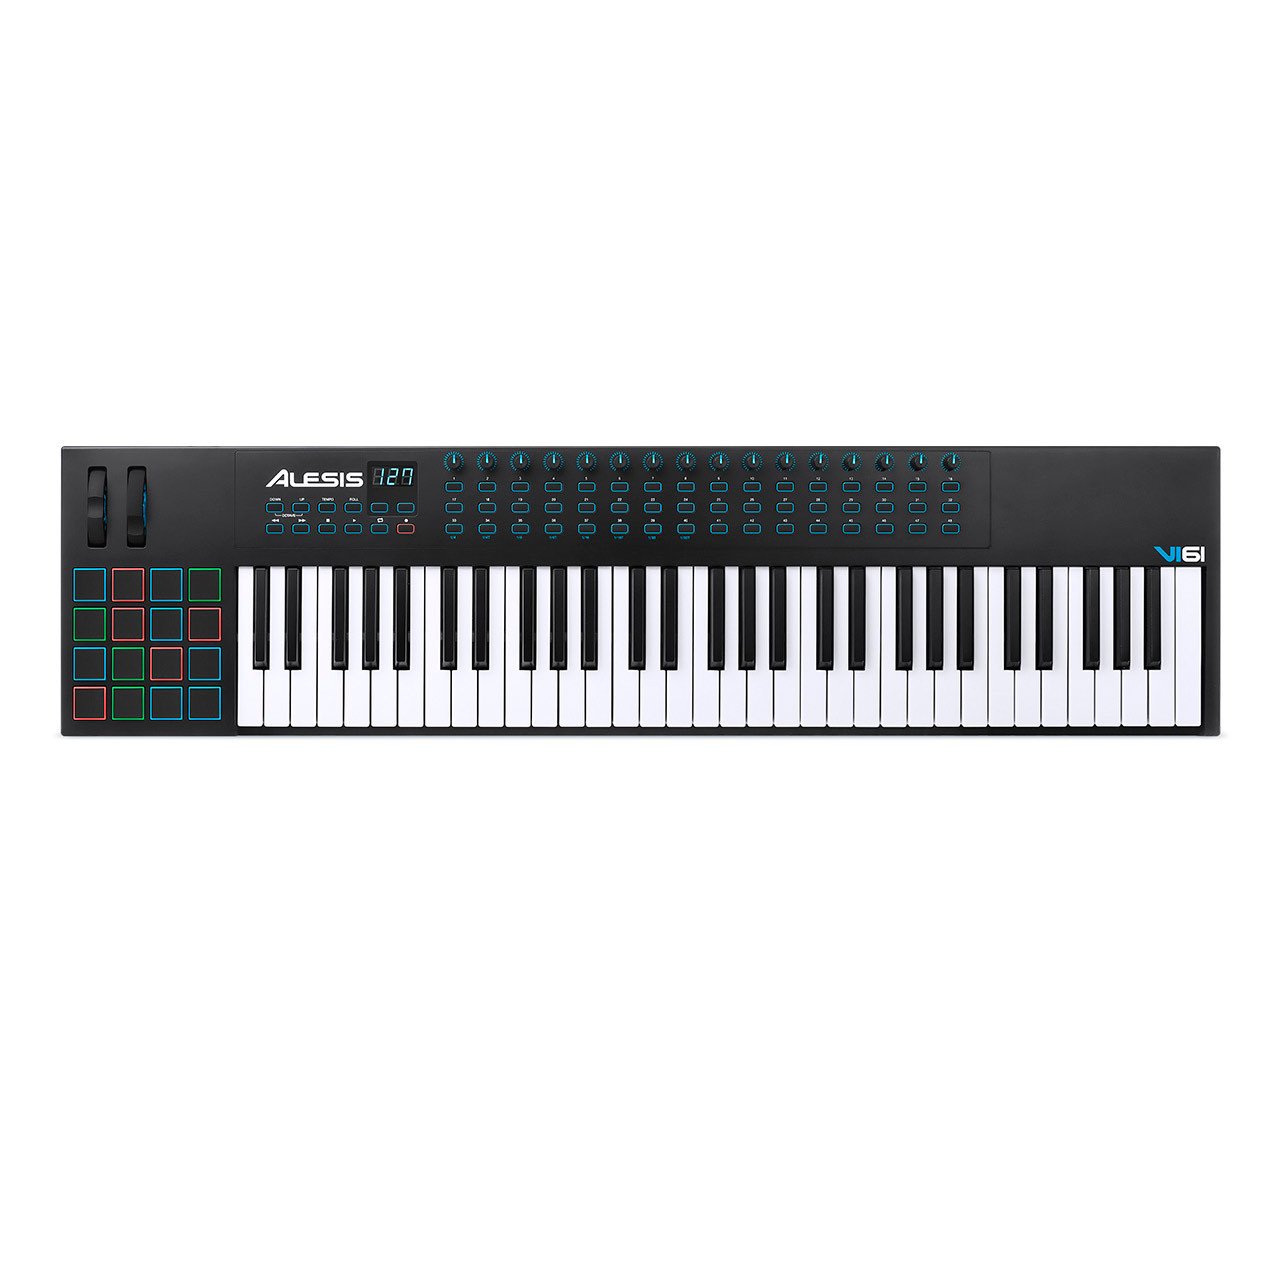 Photo 1 of Alesis VI61 Advanced 61-Key USB/MIDI Keyboard Controller (MISSING POWER CORD)(UNABLE TO TEST)